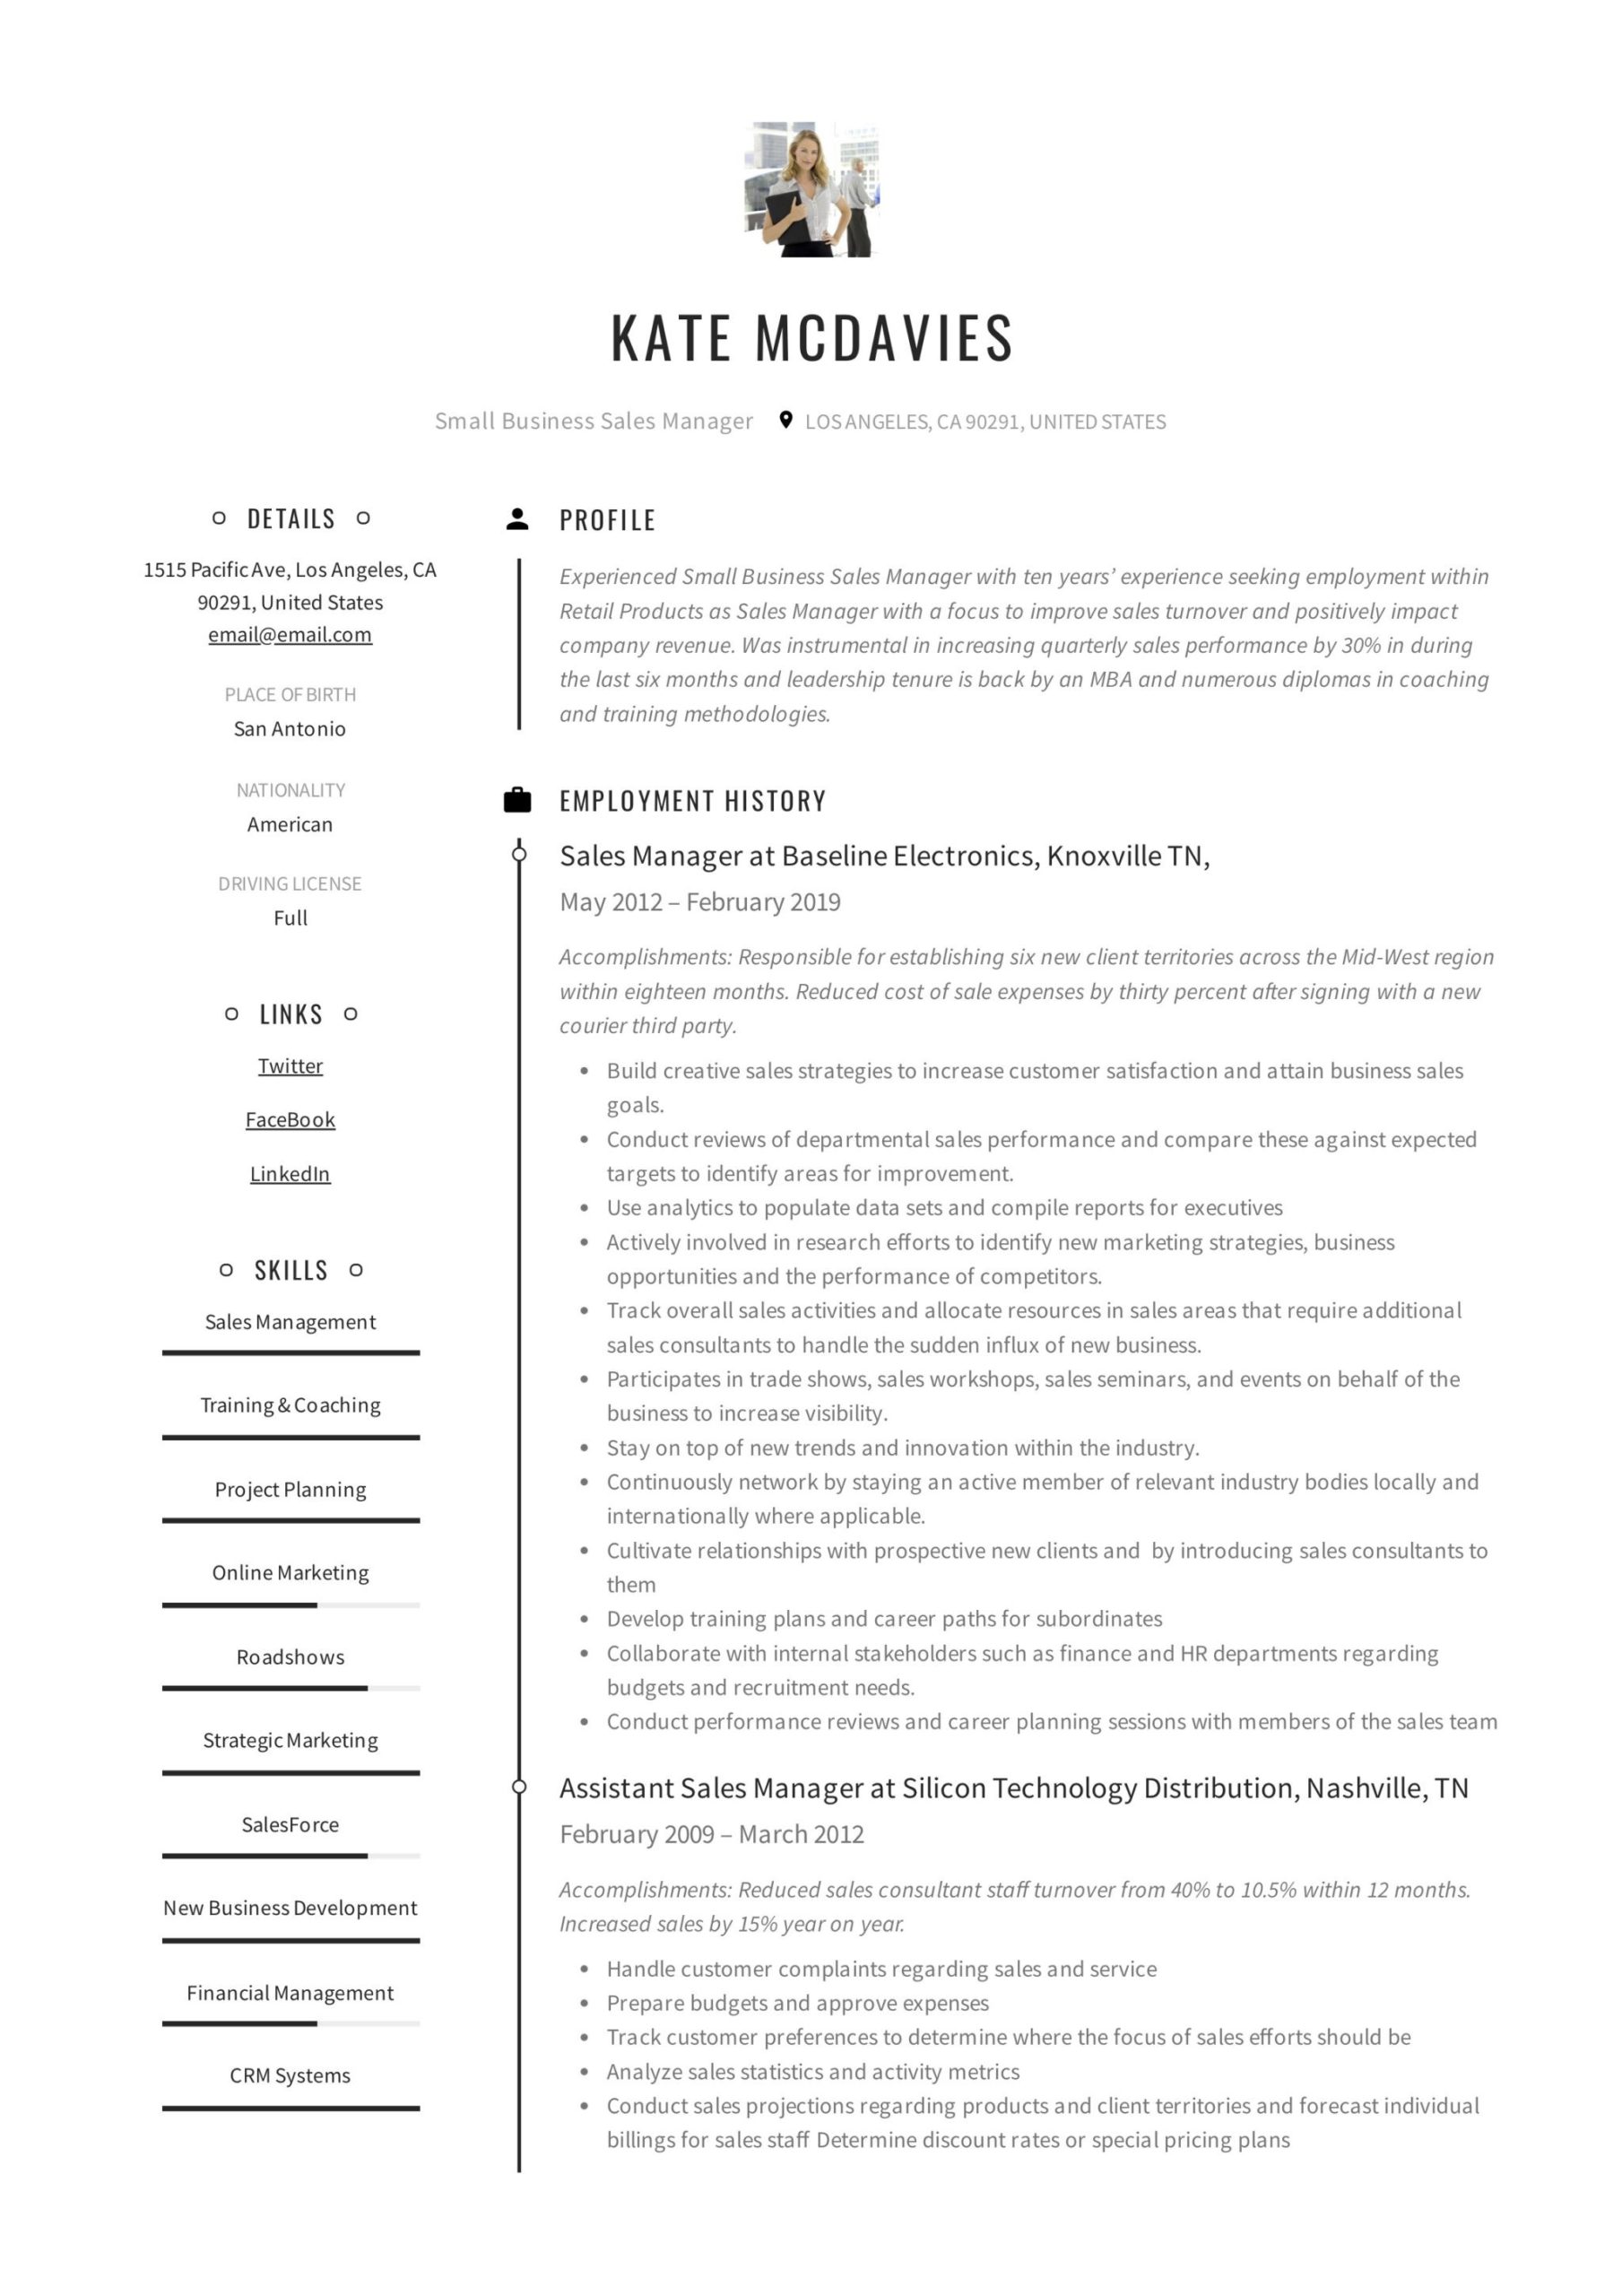 Outside Catering Sales Manager Resume Sample Guide: Small Business Sales Manager Resume [x12] Sample Pdf 2020